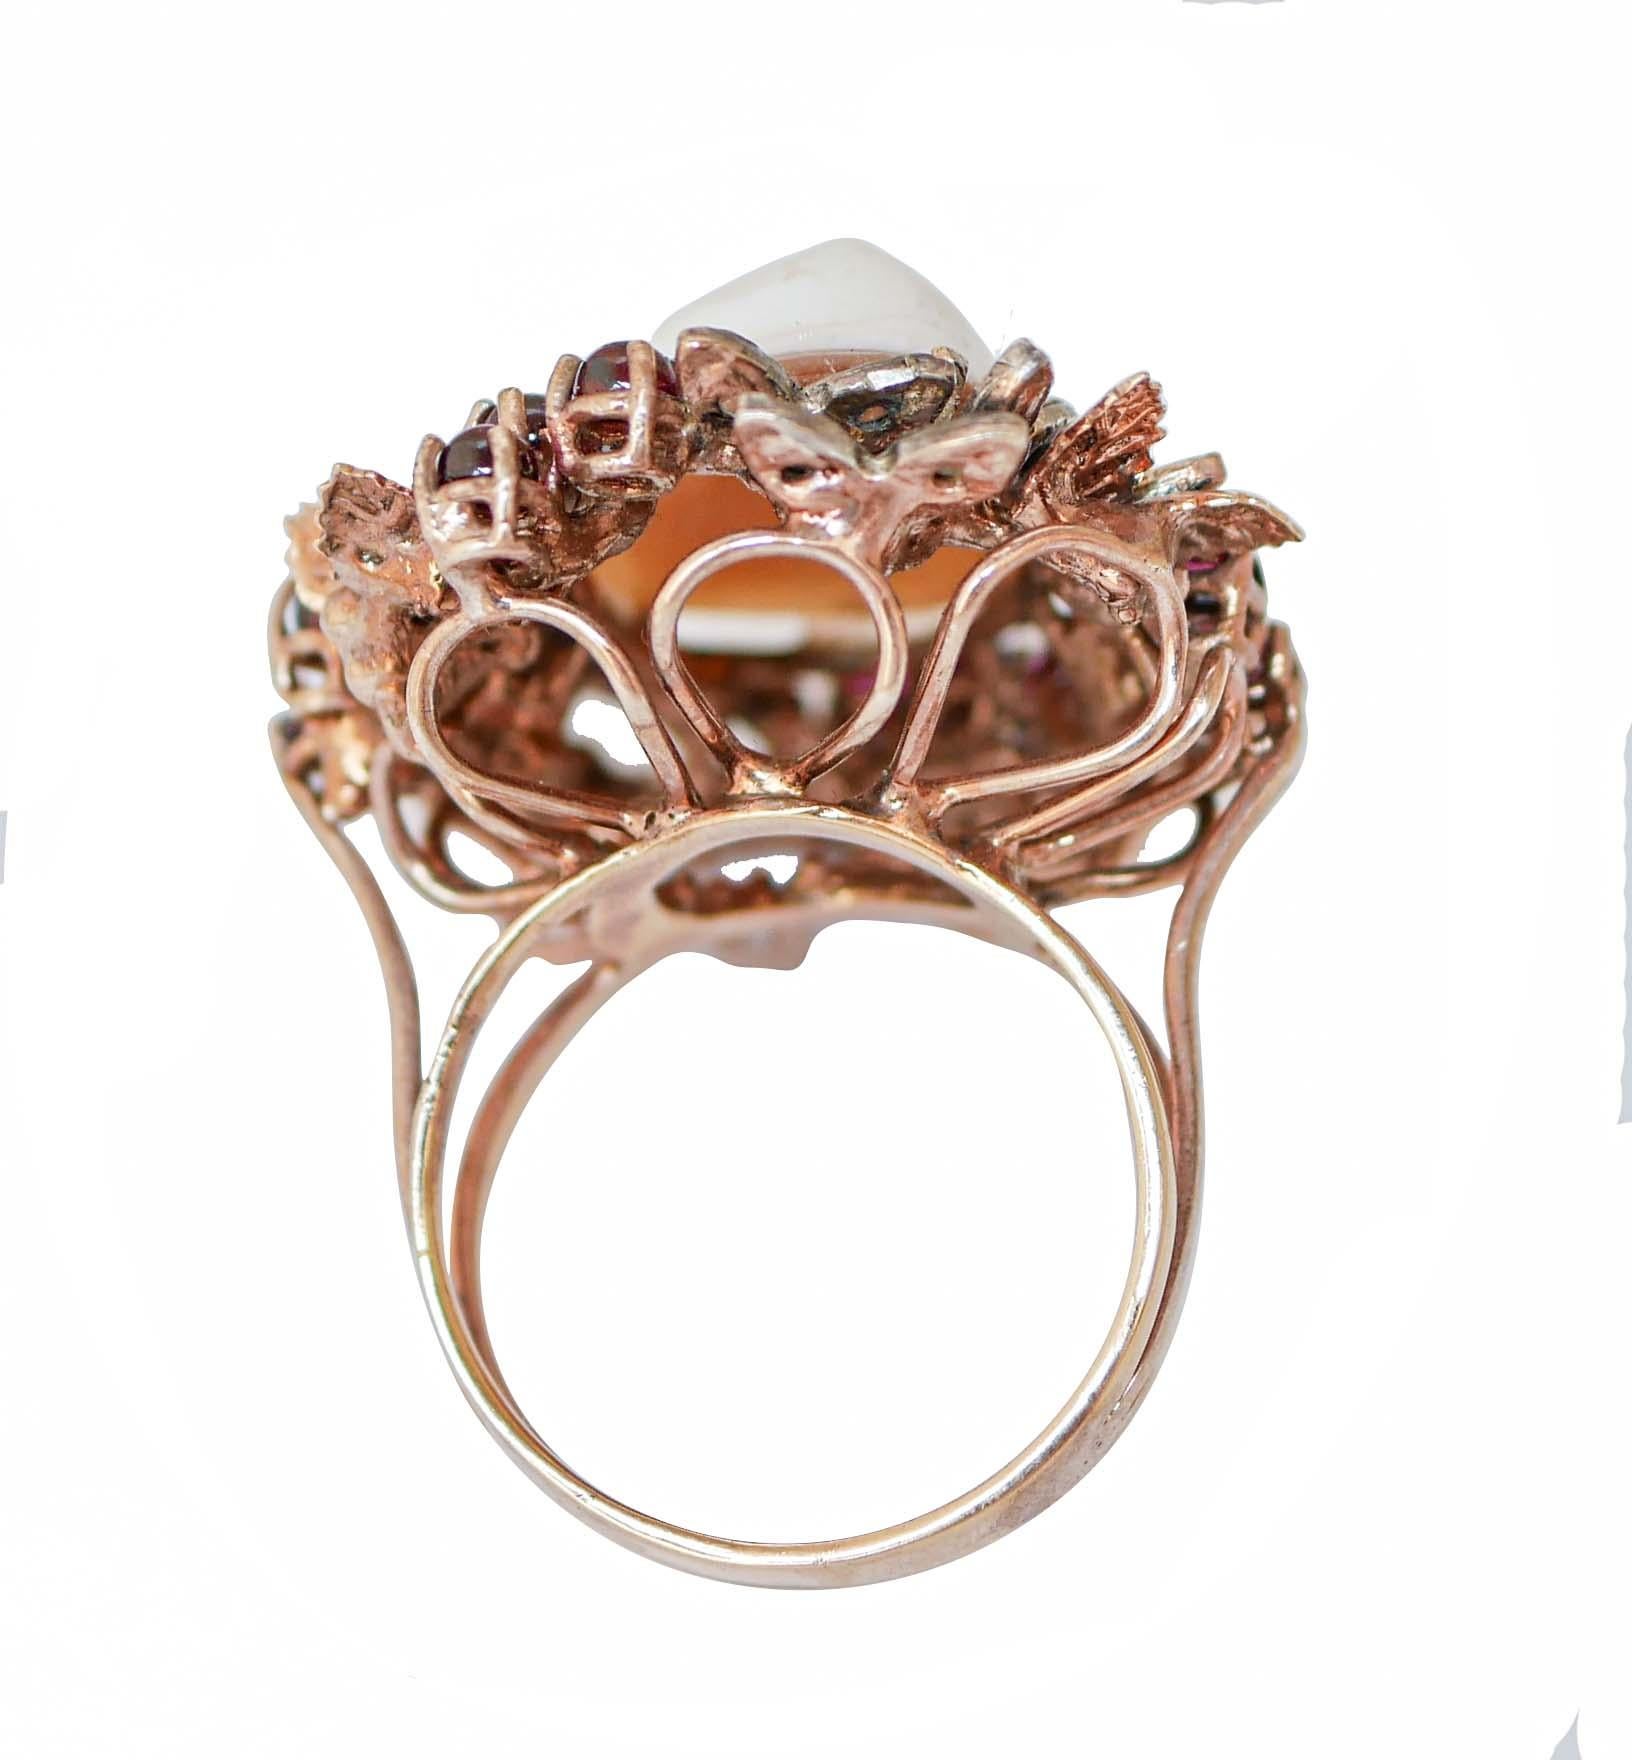 Retro Cameo, Diamonds, Garnets, Rose Gold and Silver Ring. For Sale